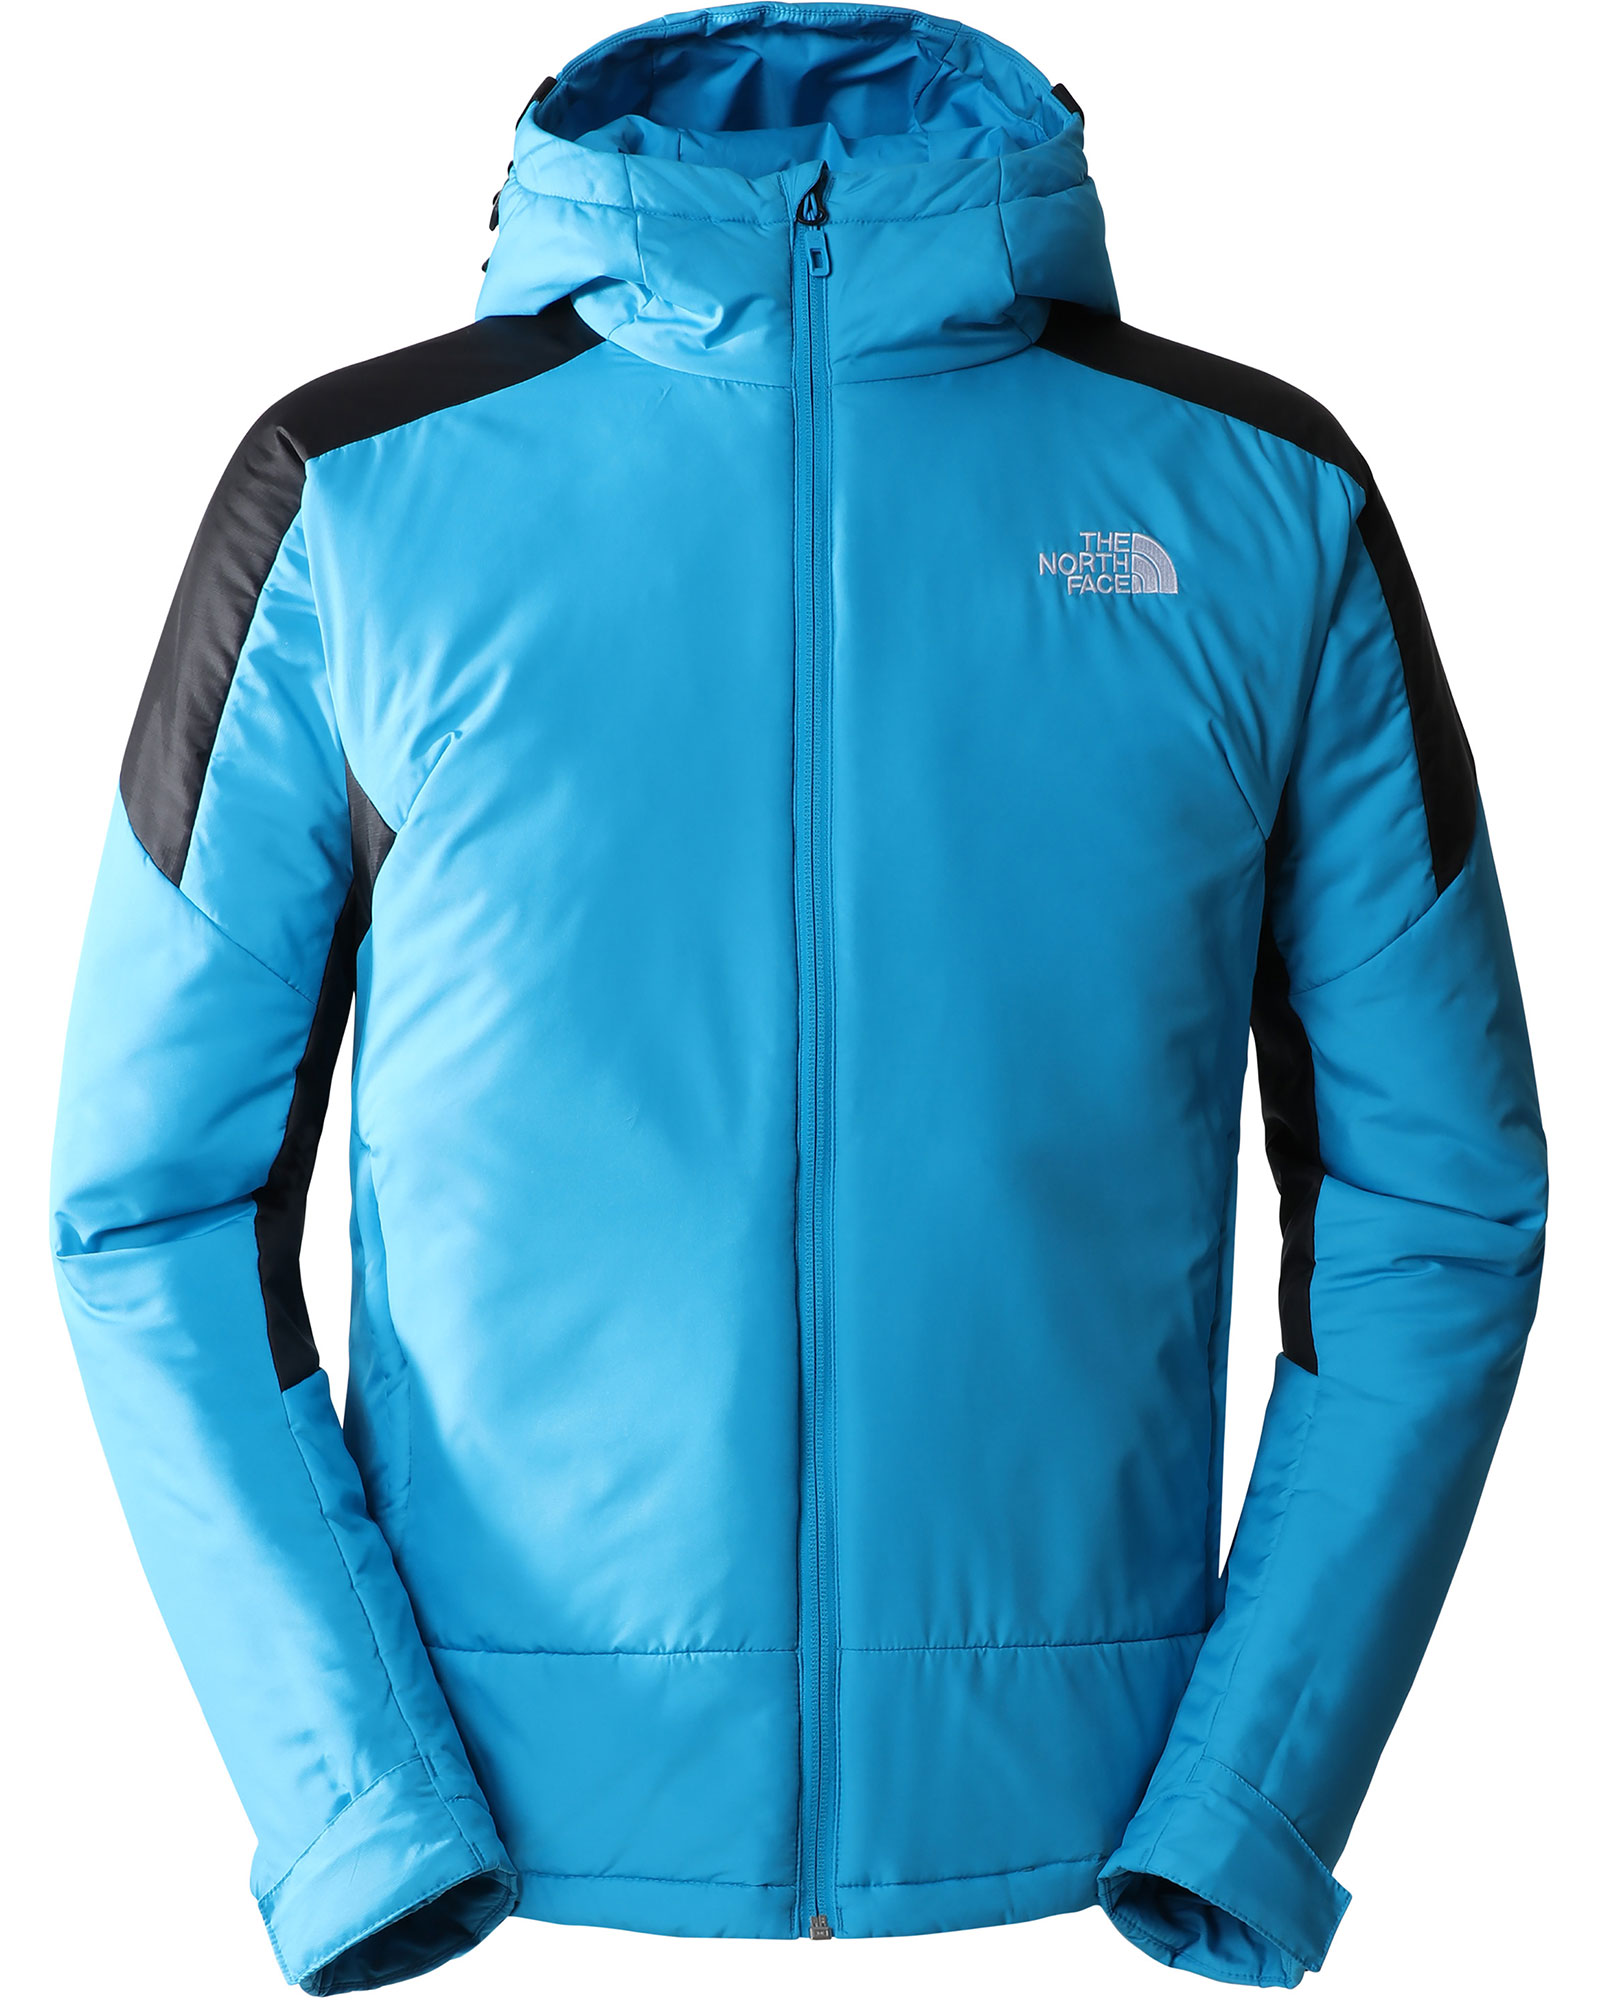 The North Face AO Circular Hybrid Men’s Insulated Jacket - Acoustic Blue XL